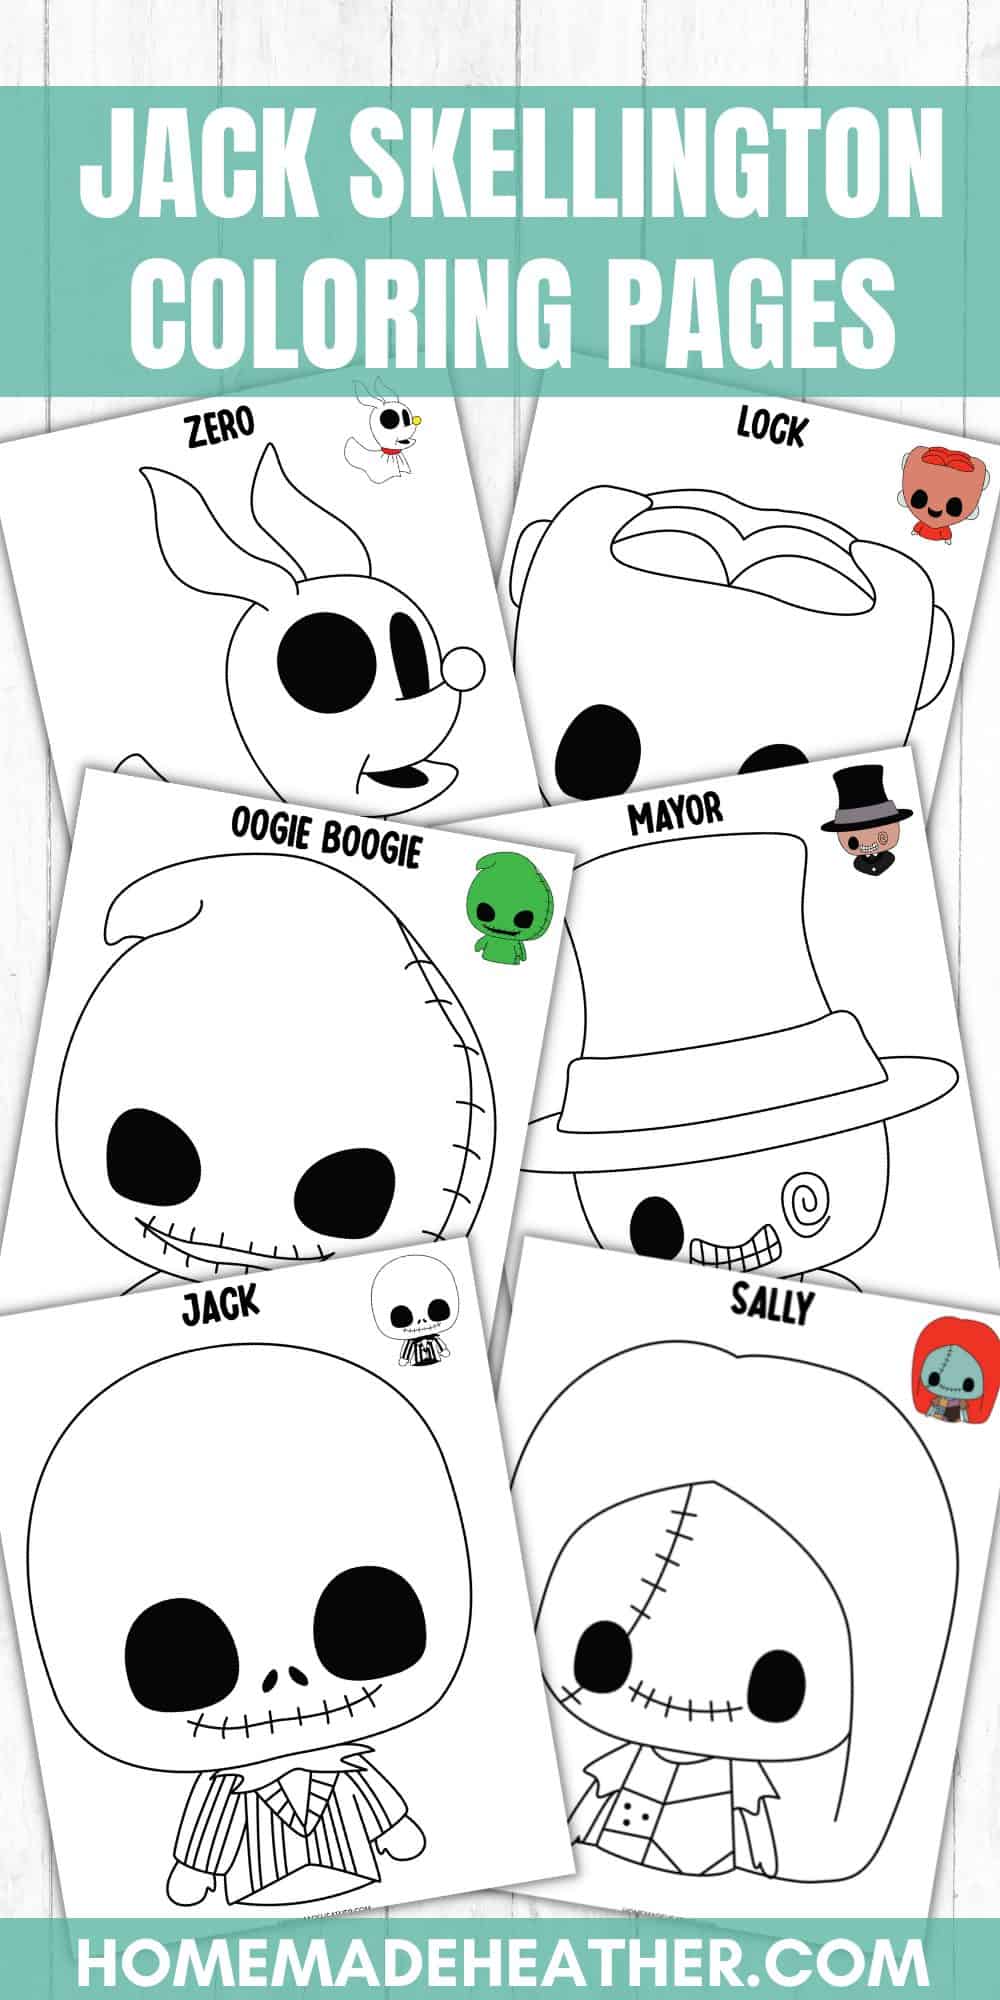 Jack skellington coloring pages homemade heather